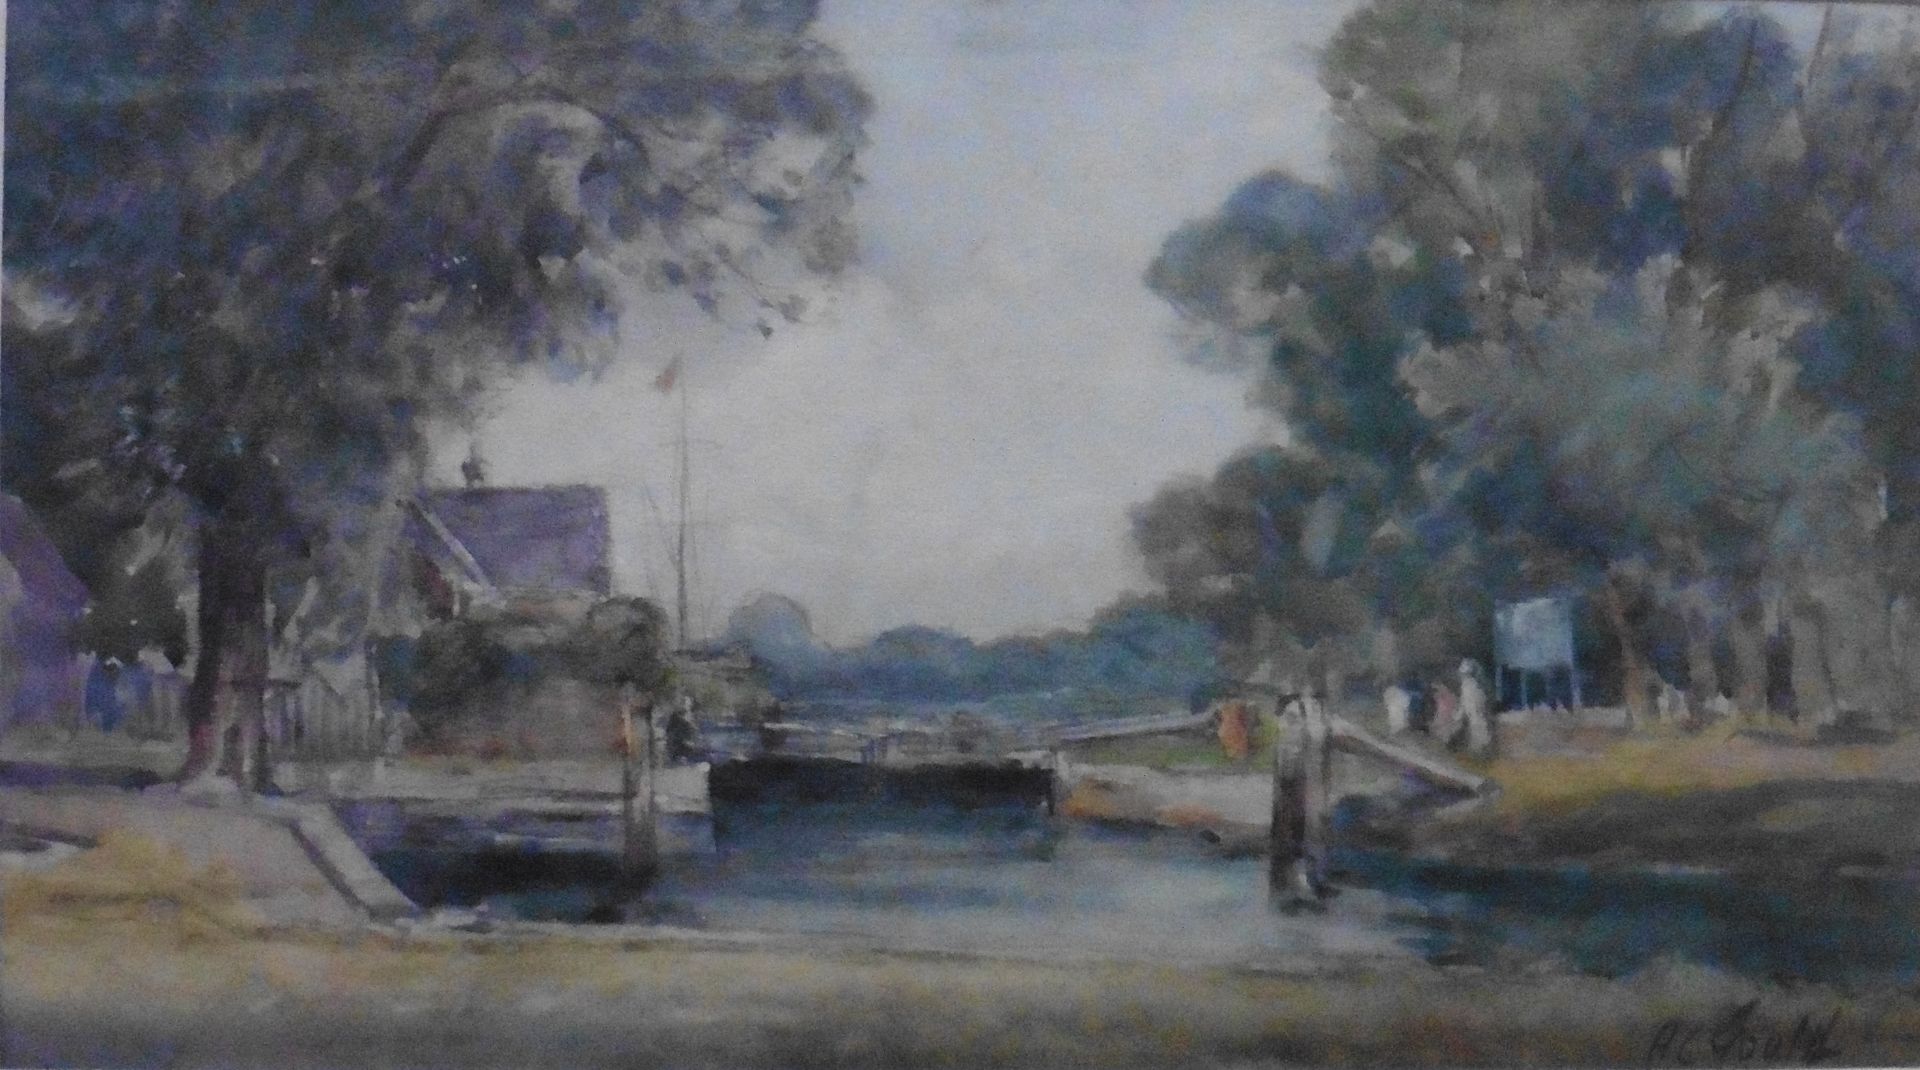 Original watercolour by Alexander Carruthers Gould 1870-1948 - Lock gates